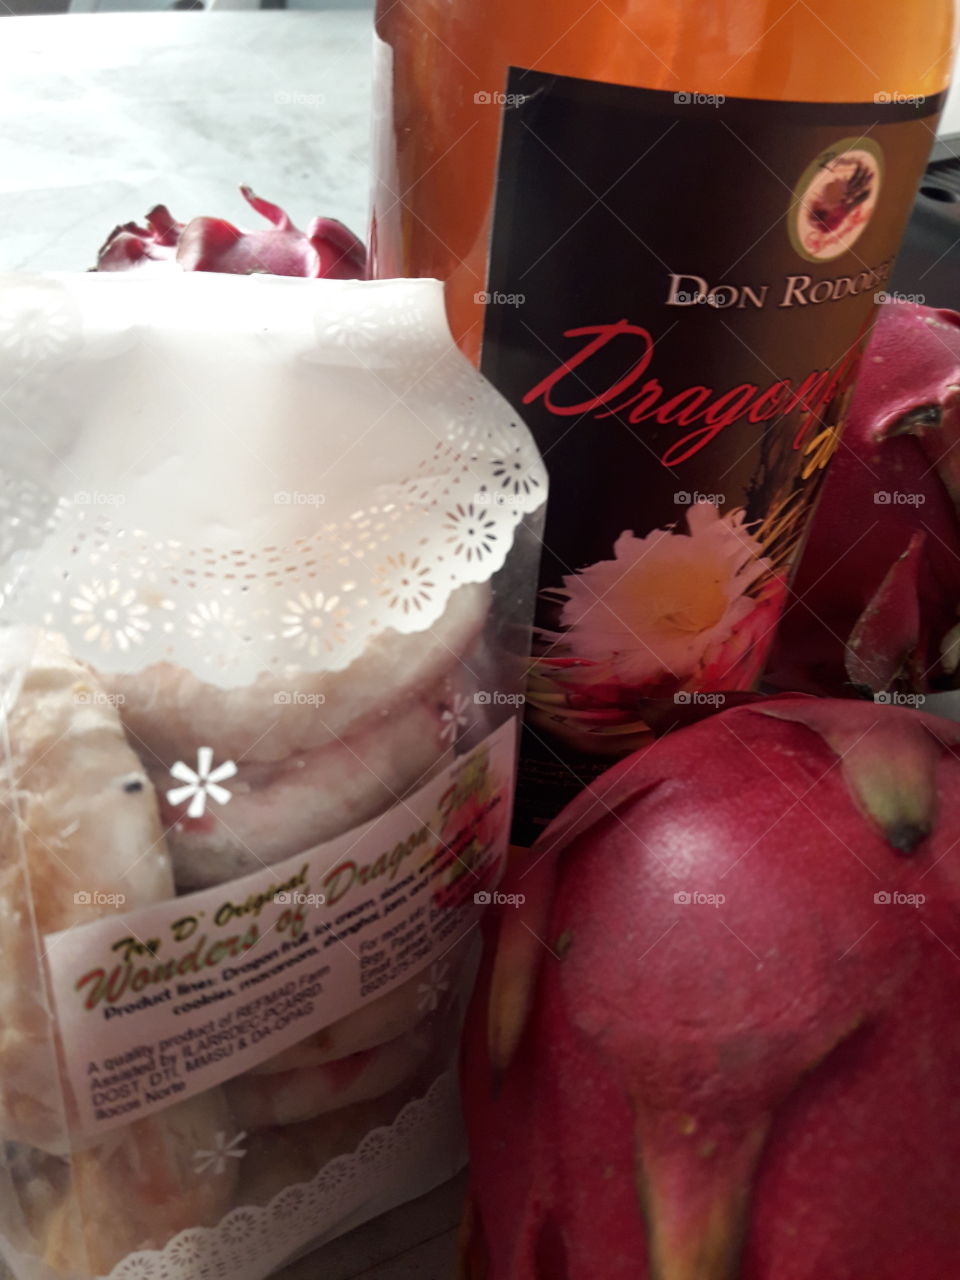 dragonfruit products